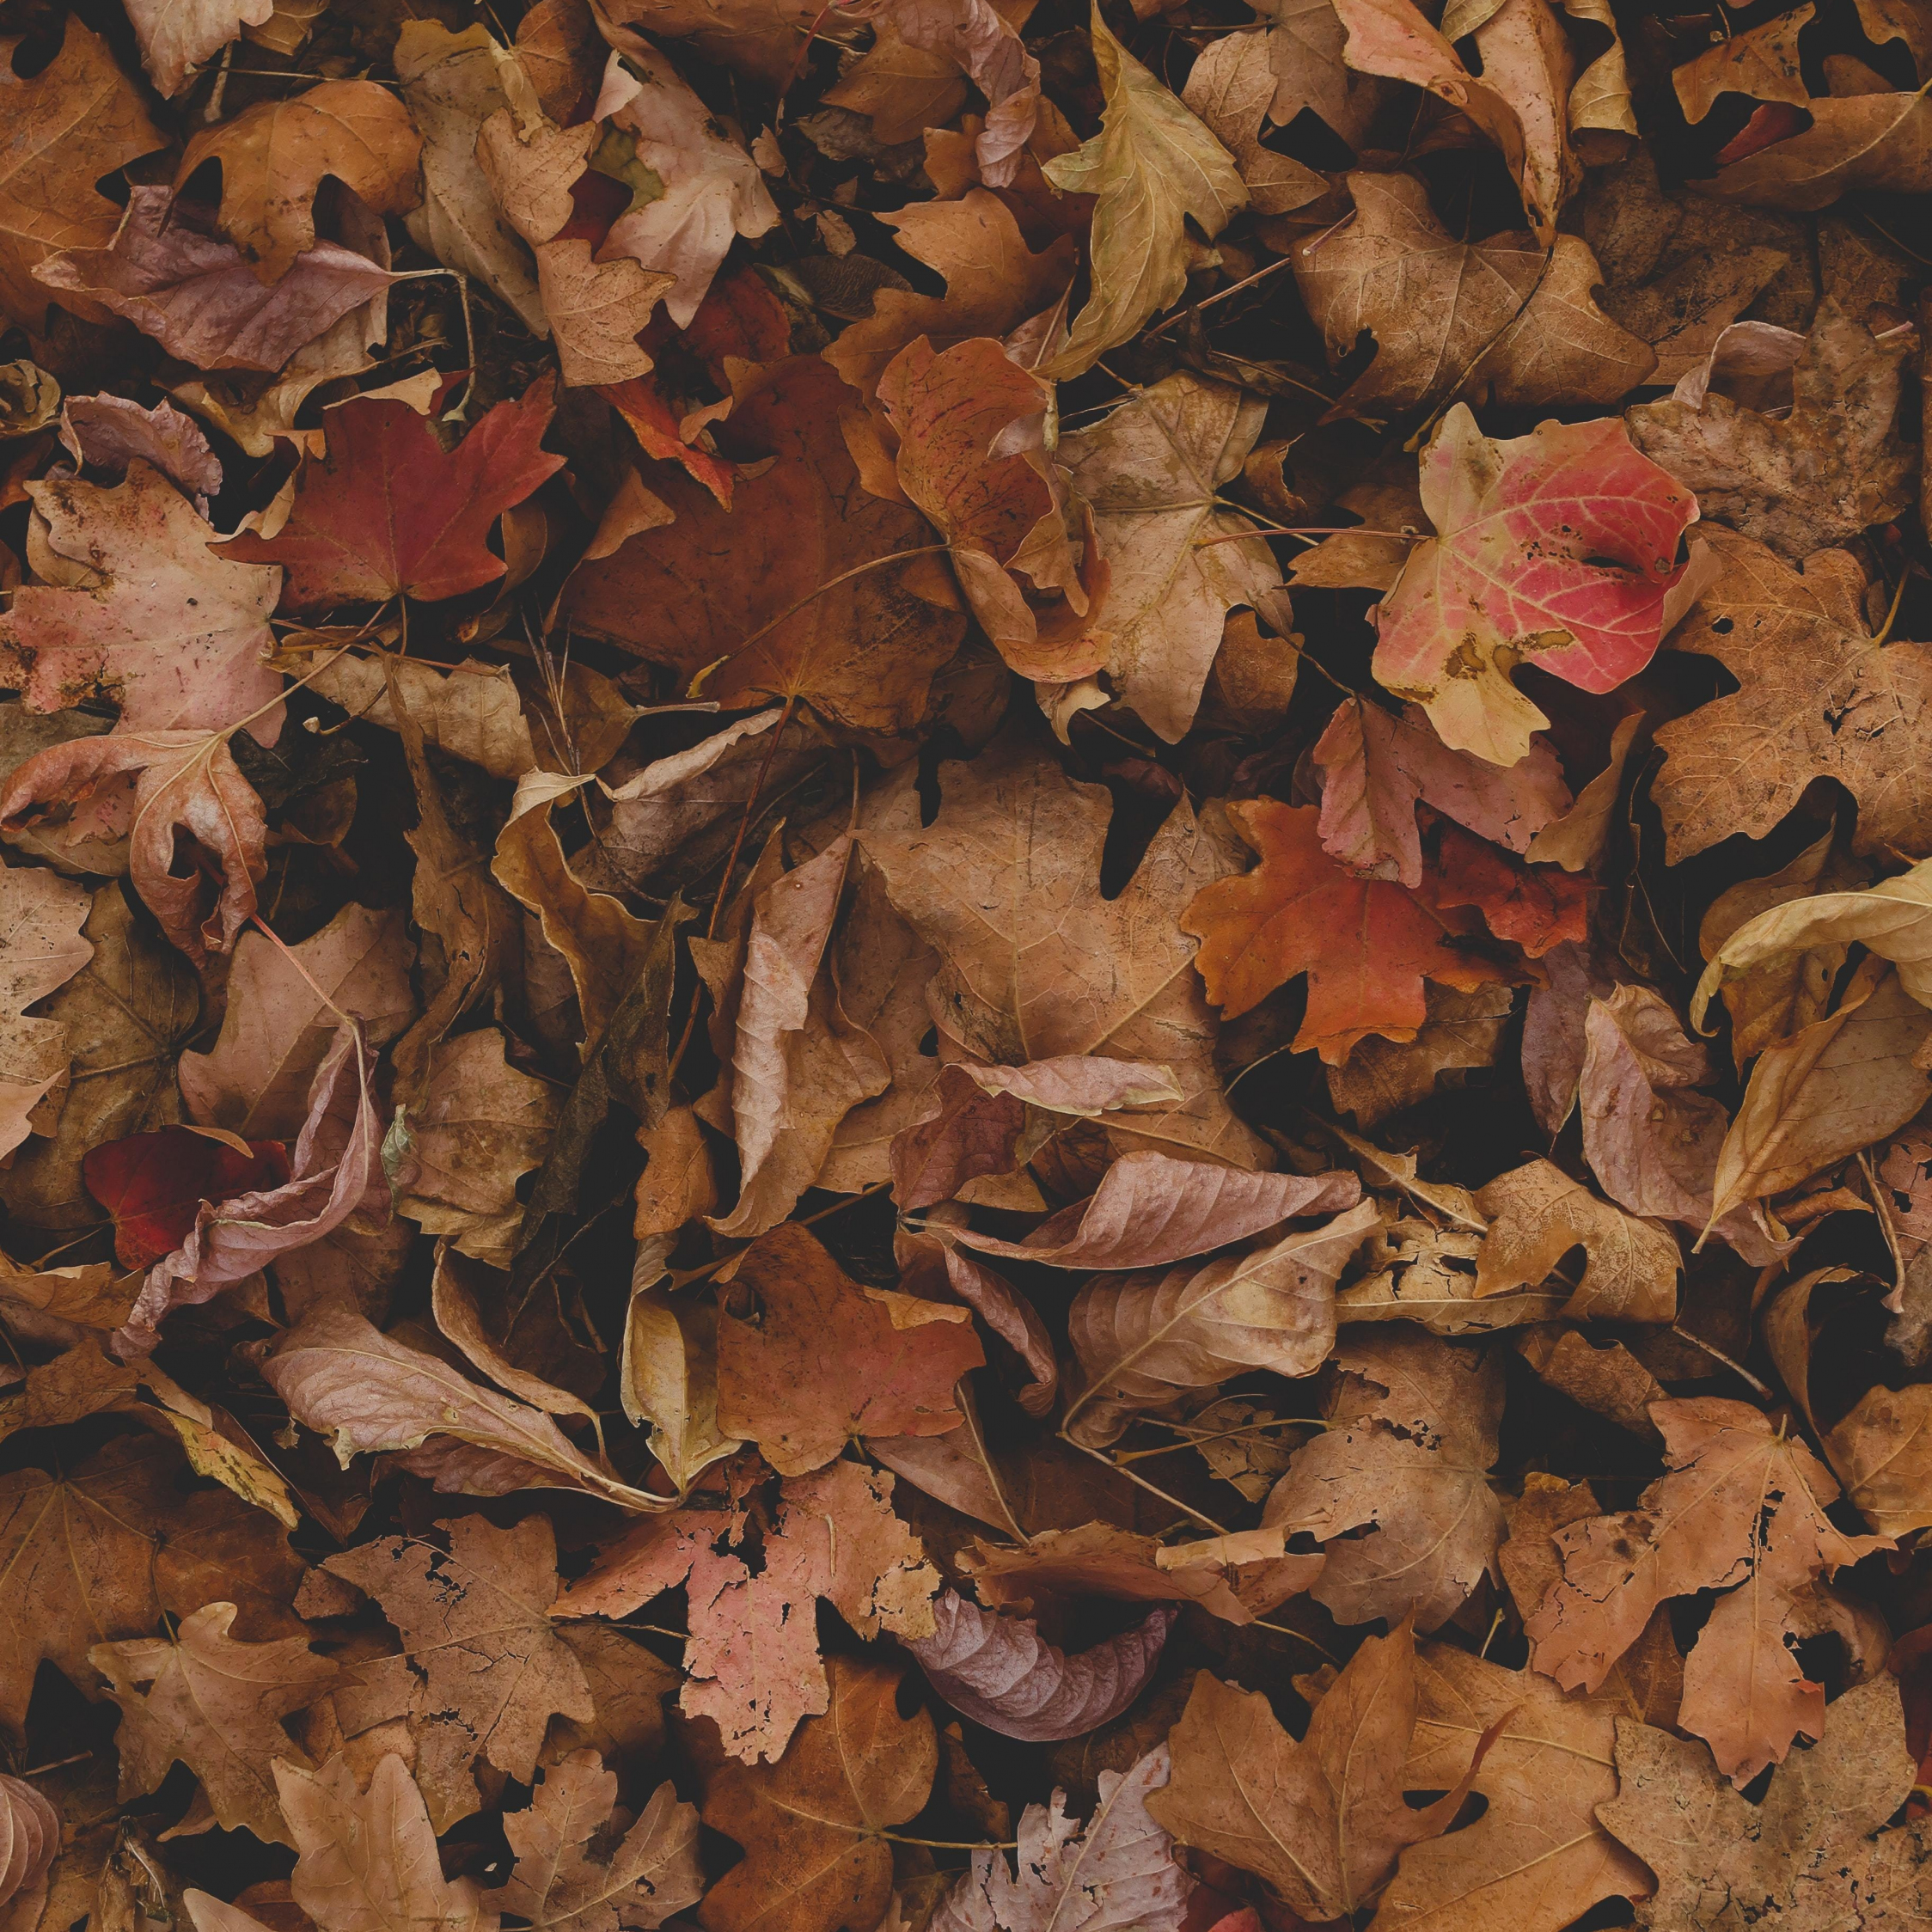 Download dry, fallen leaves, autumn 2248x2248 wallpaper, ipad air, ipad air ipad ipad ipad mini ipad mini 2248x2248 HD image, background, 26141